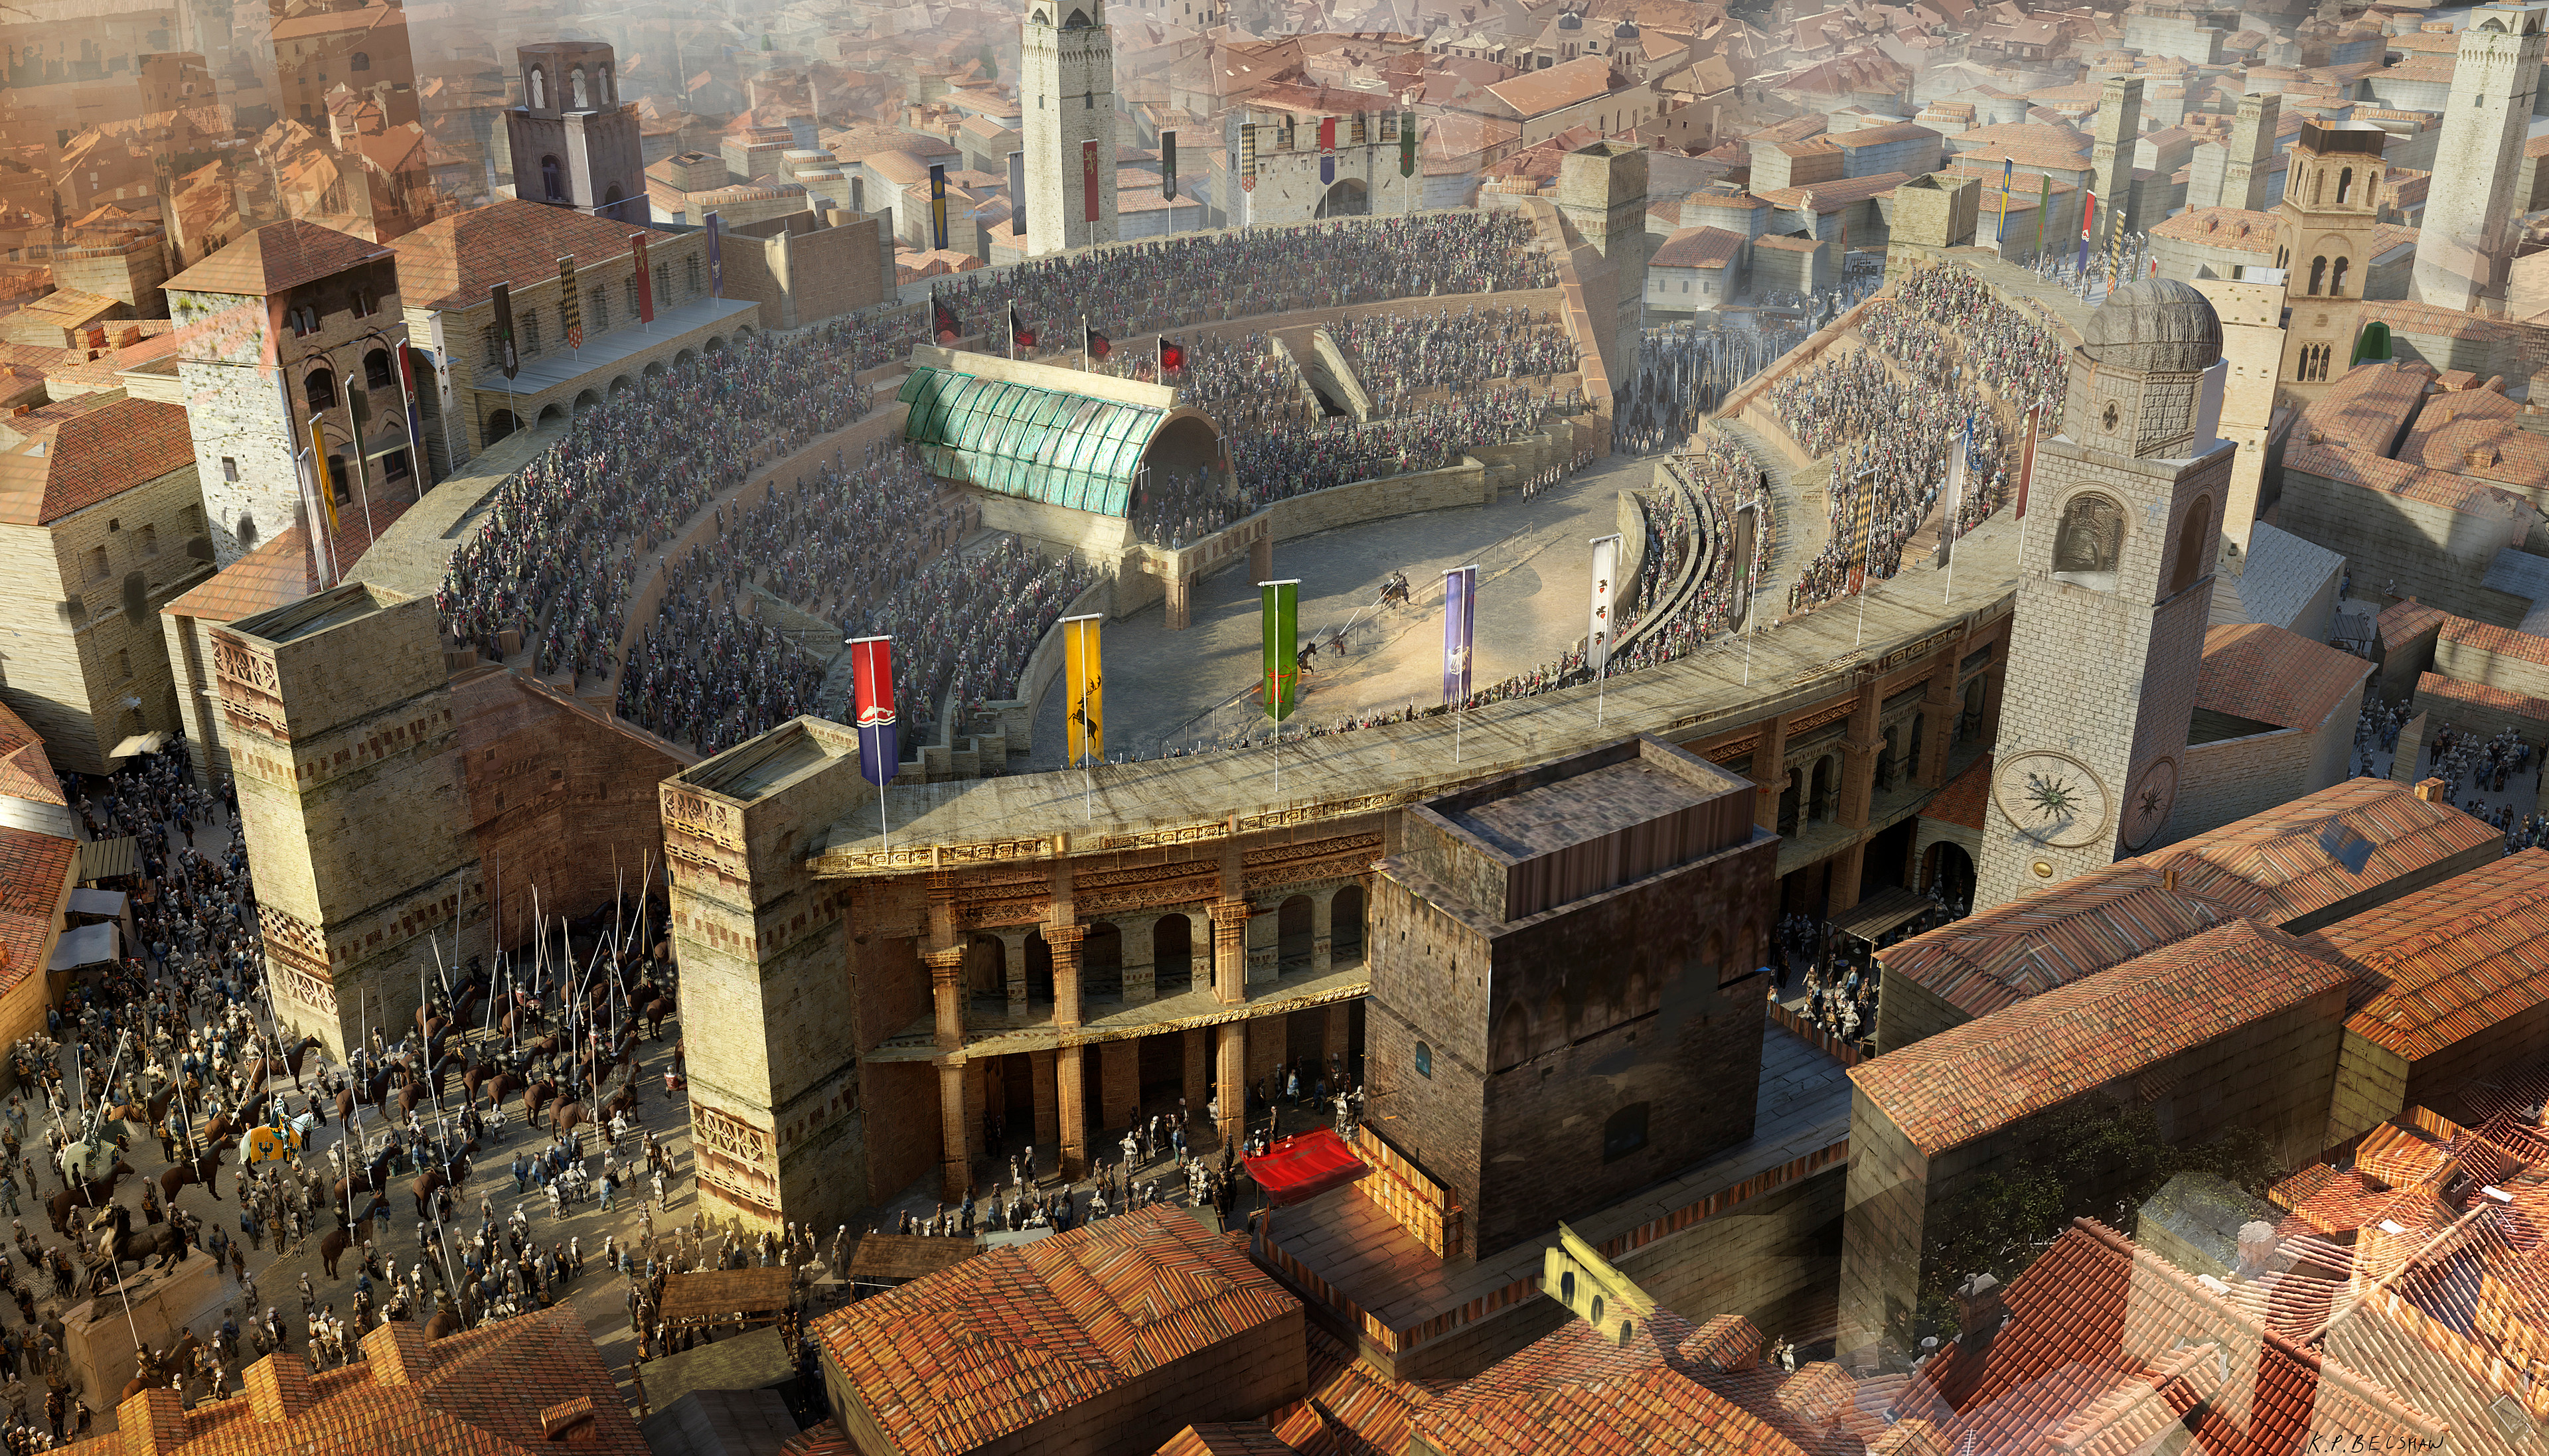 Increased the height of the stadium and brought in the surrounding buildings of Kings Landing closer